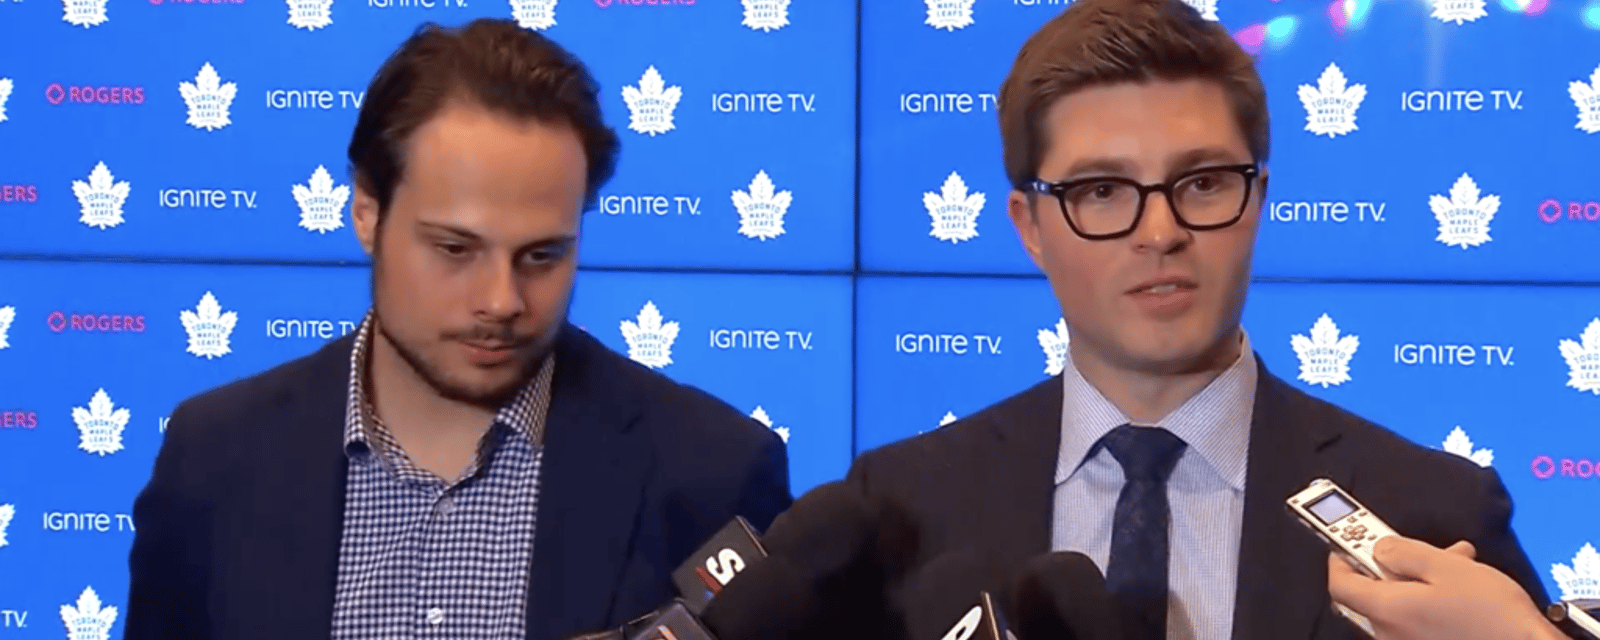 Kyle Dubas could walk away even if the Maple Leafs win a playoff round